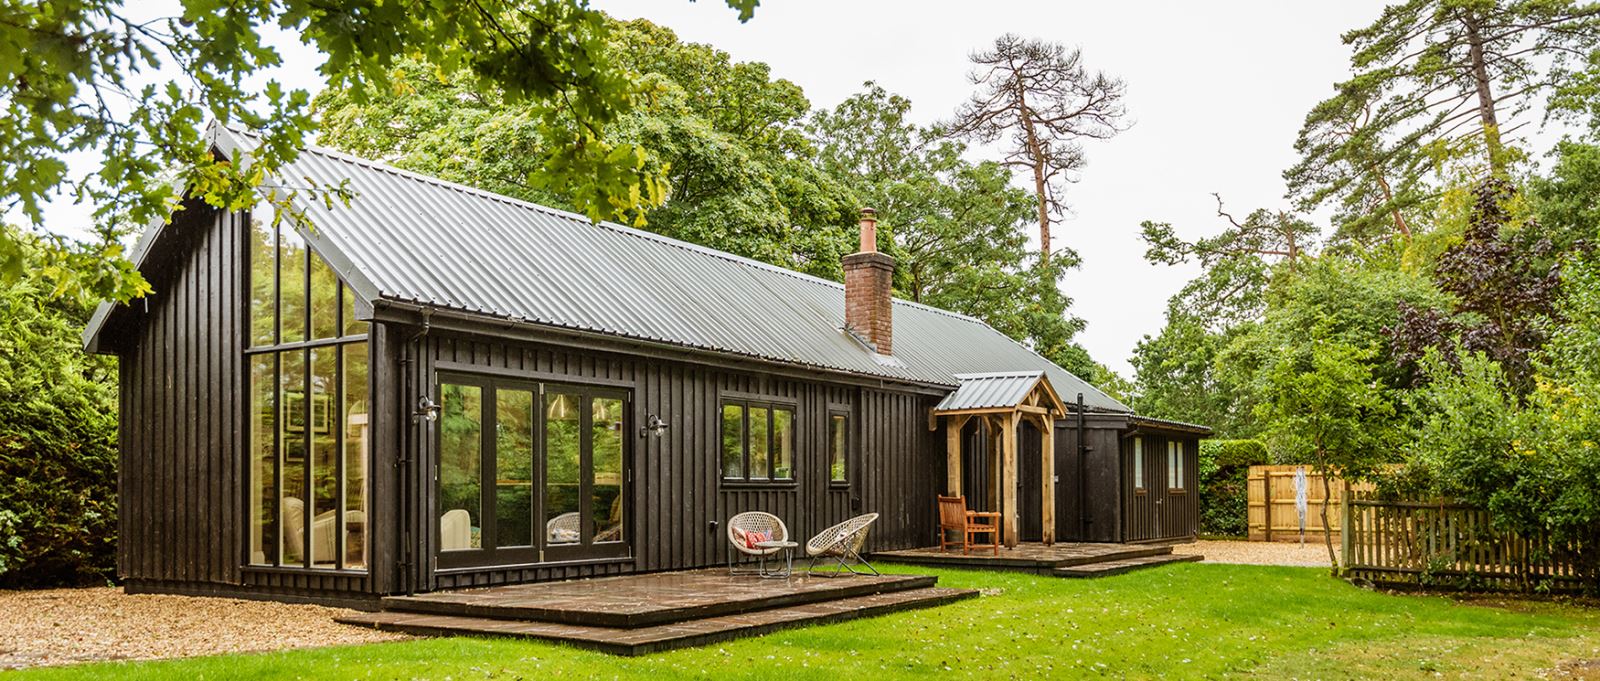 The Coding Hut, New Forest